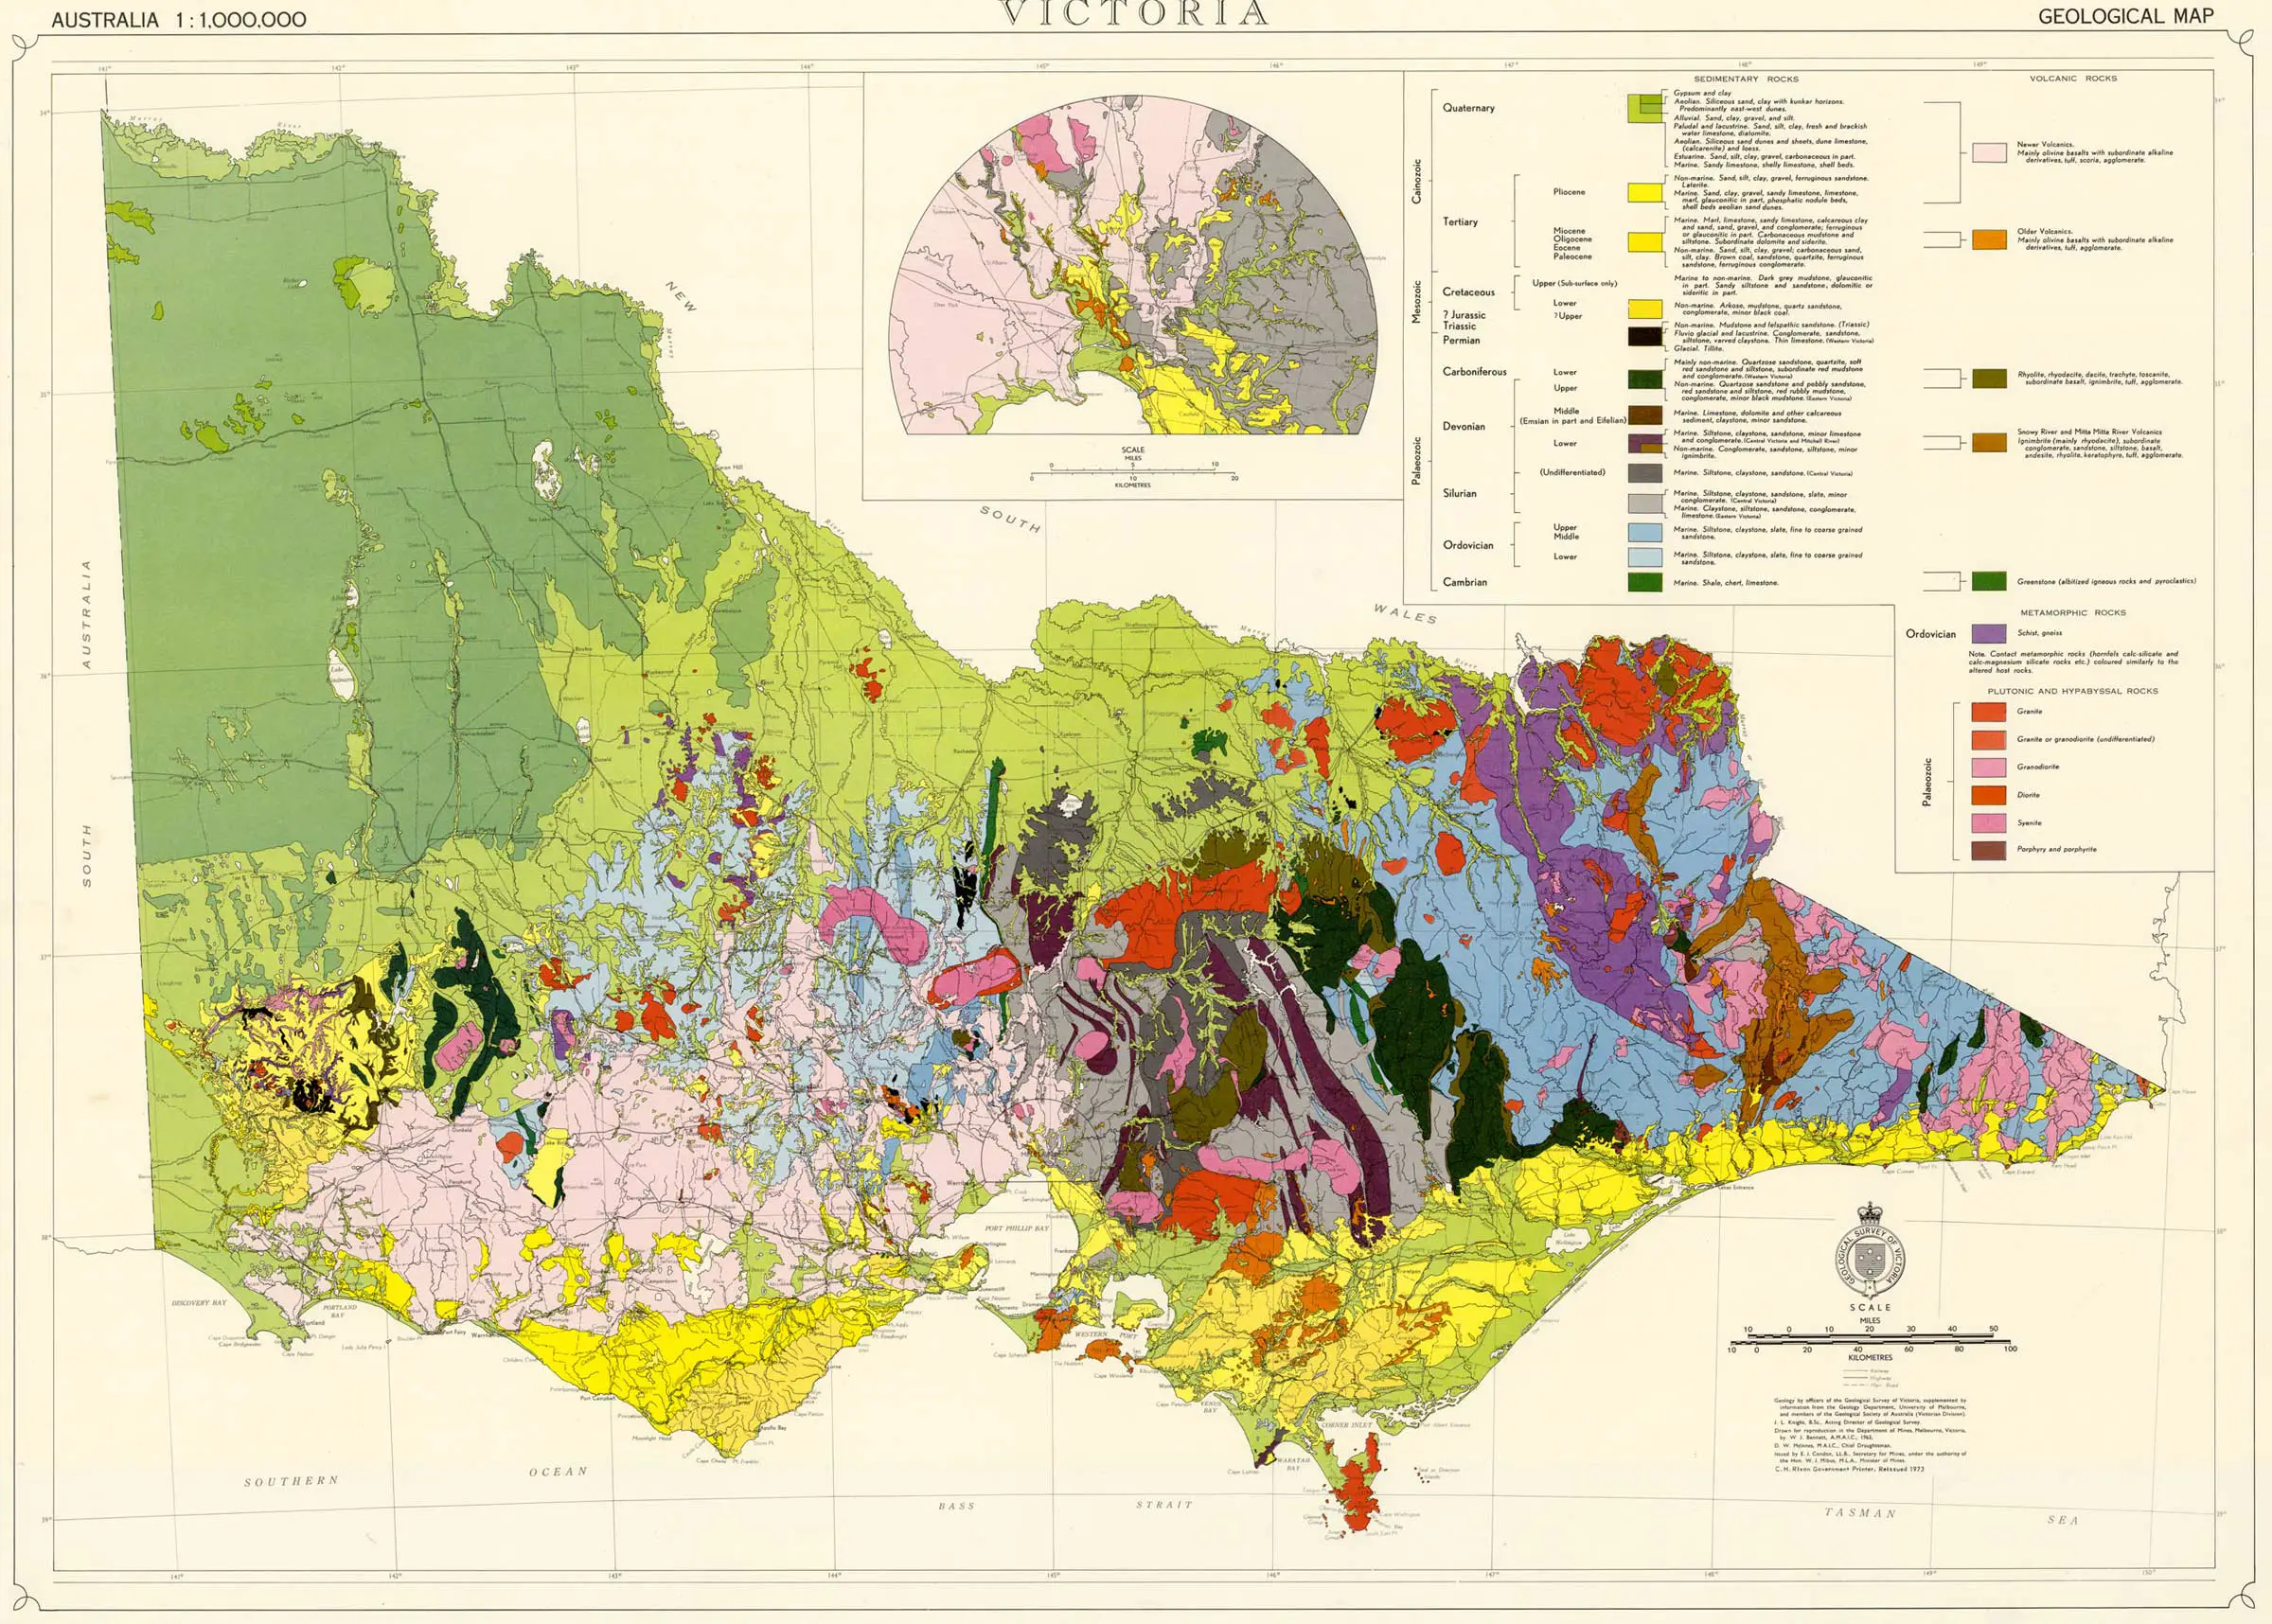 Geological Map of Victoria